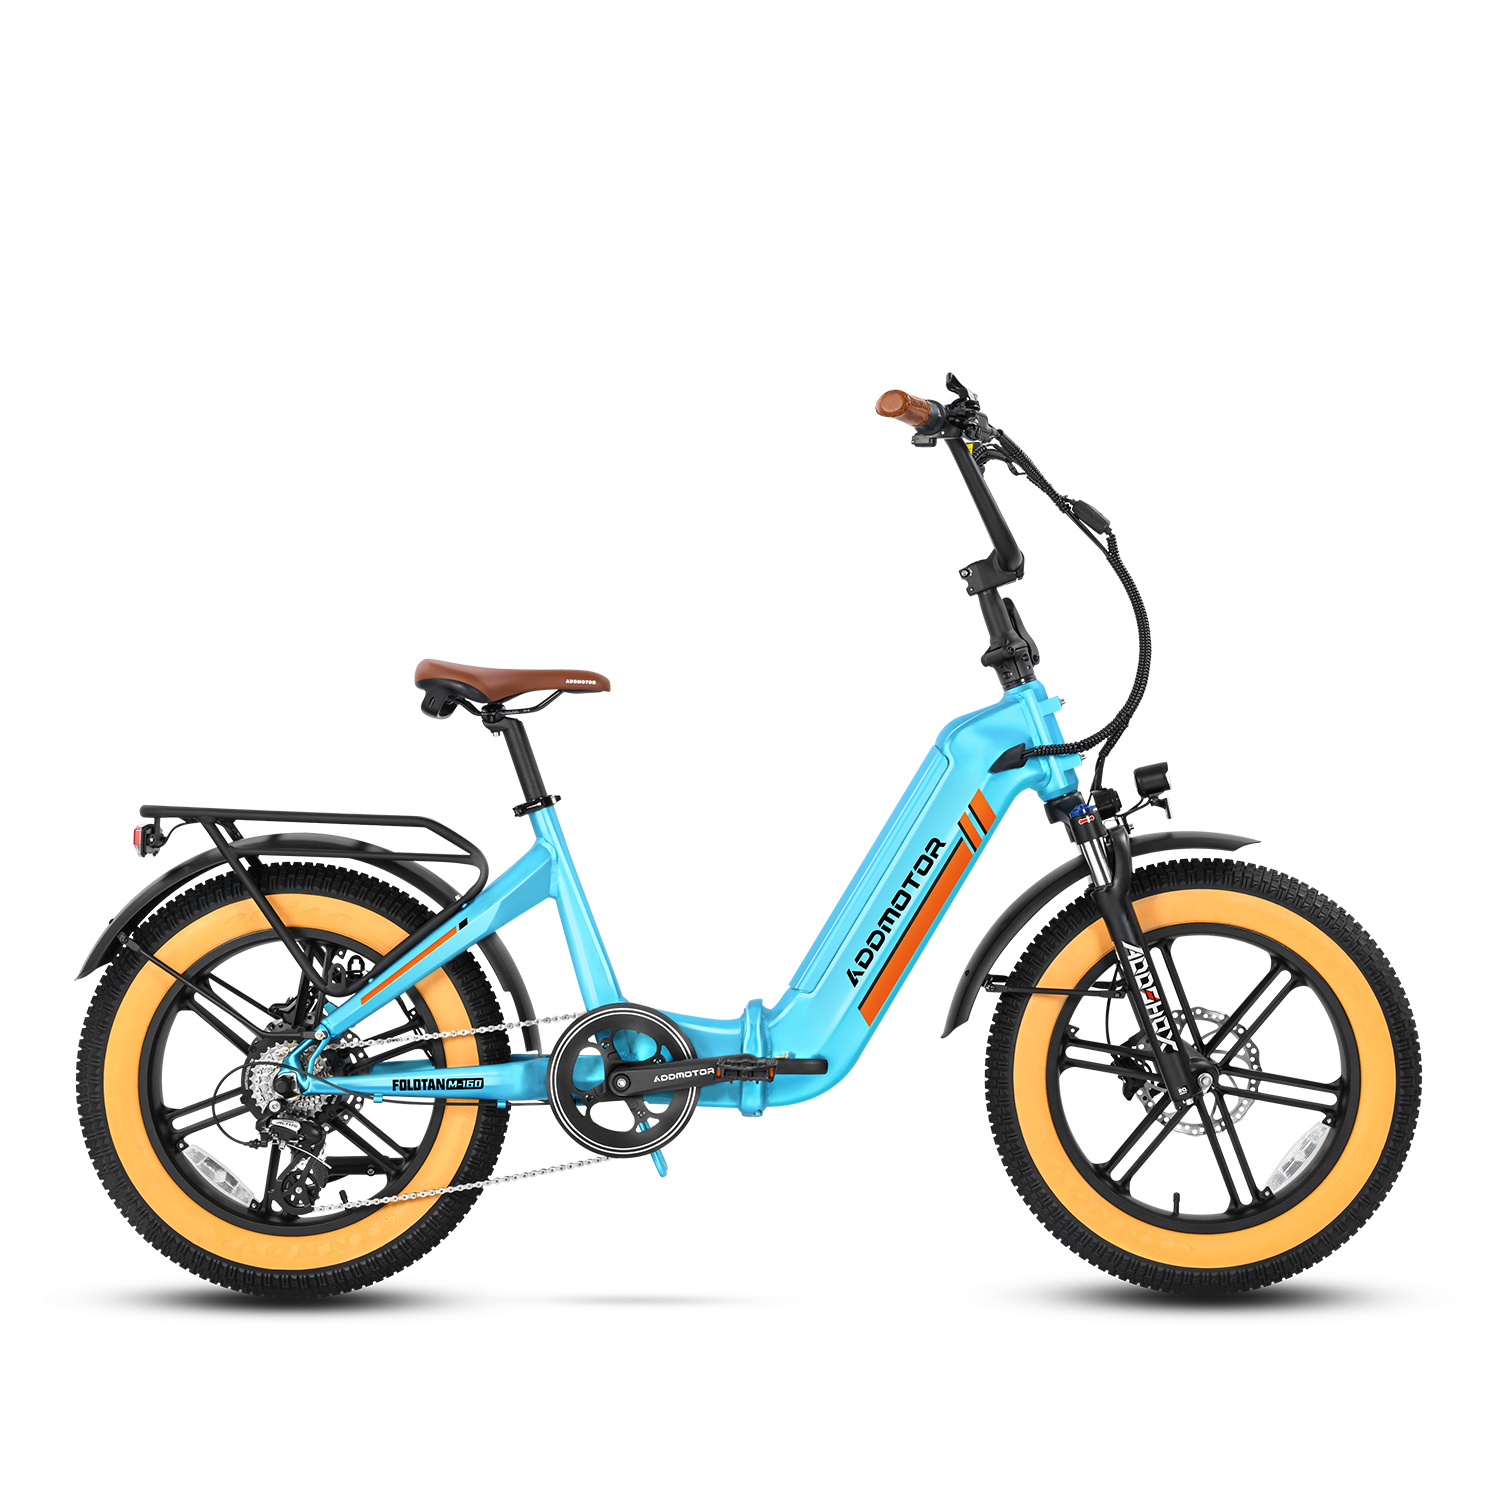 Addmotor Folding Electric Bicycle with Fat Tire Foldtan M-160 Built-In Battery Folding Ebike, Sky Blue